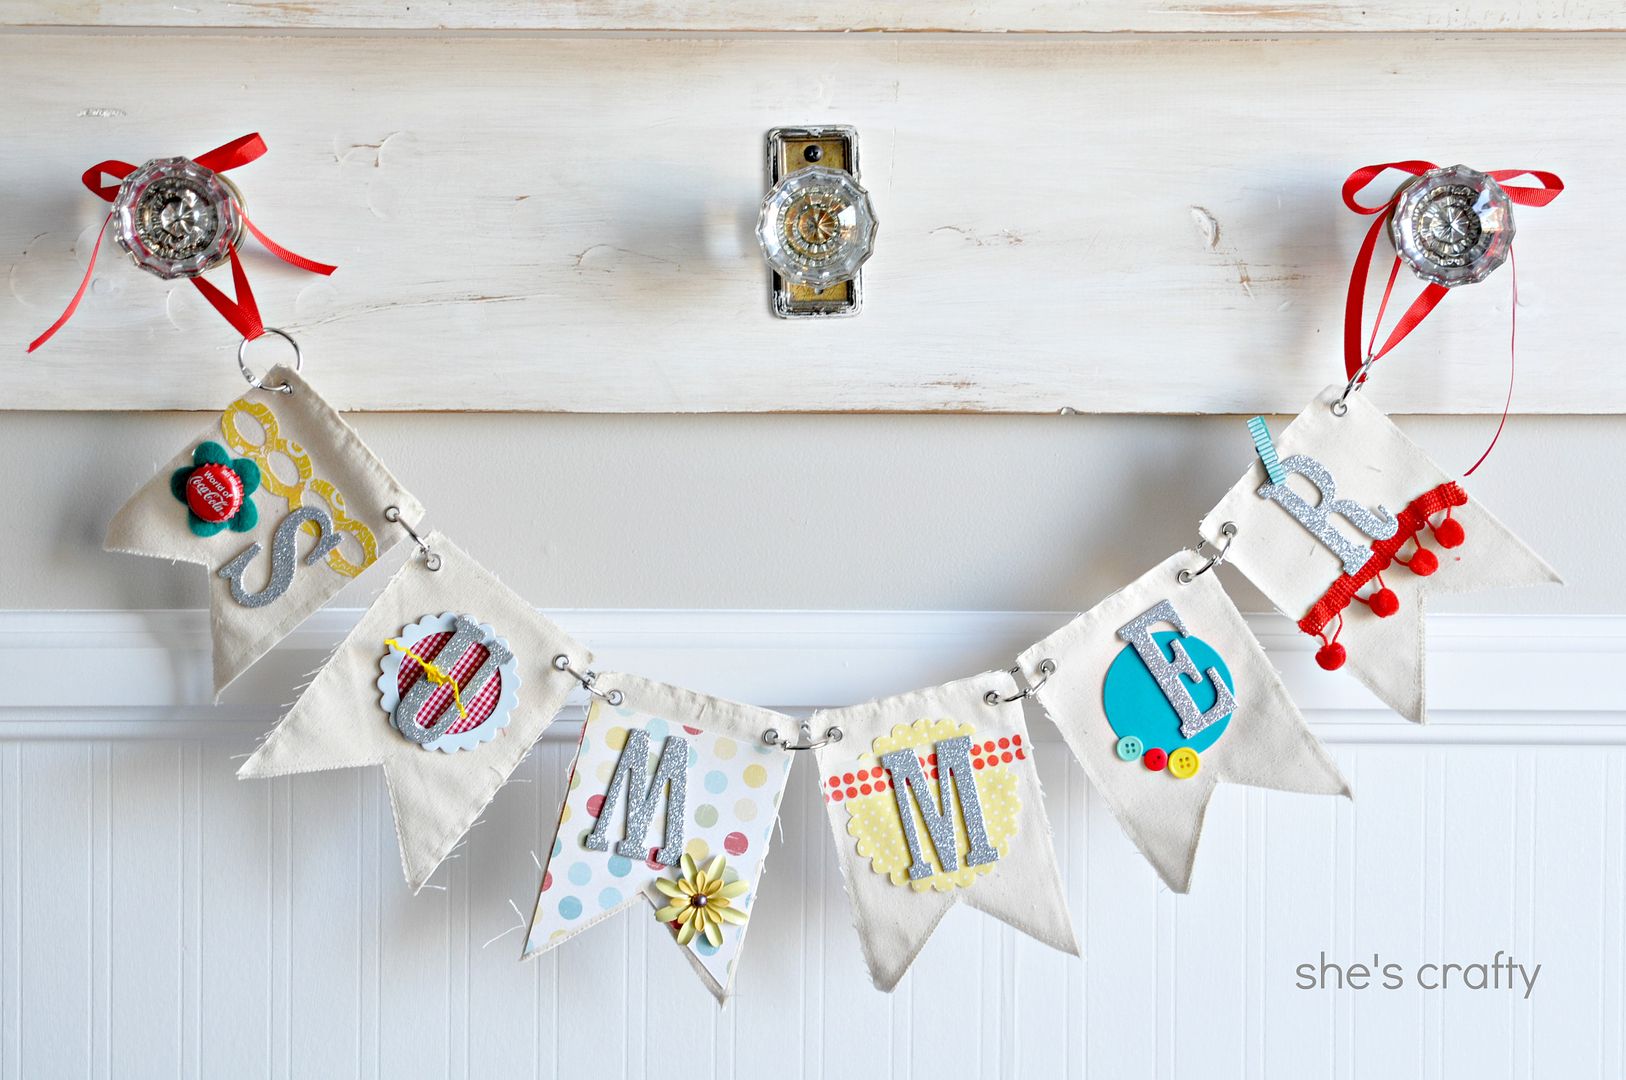 She's crafty: Colorful Summer Pennant Banner